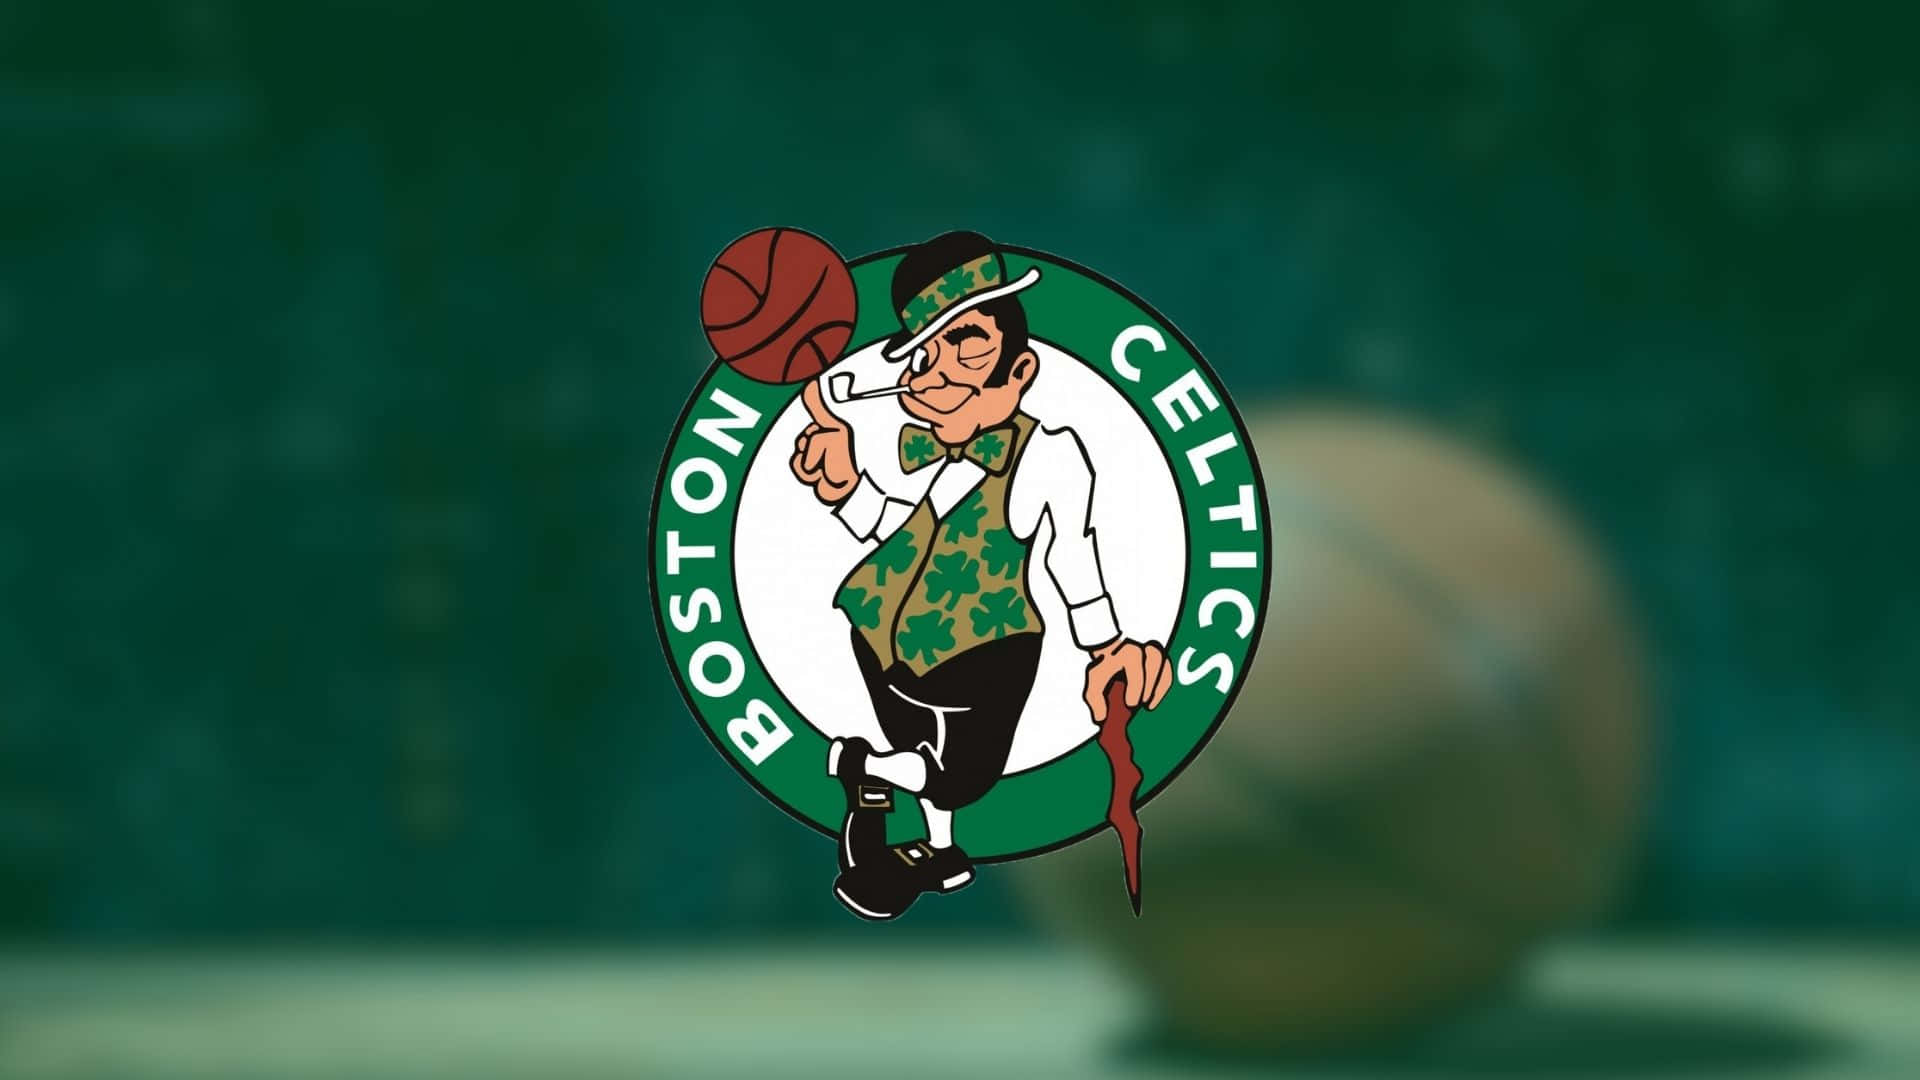 "We are the Celtics: competitive, passionate, and proud." Wallpaper